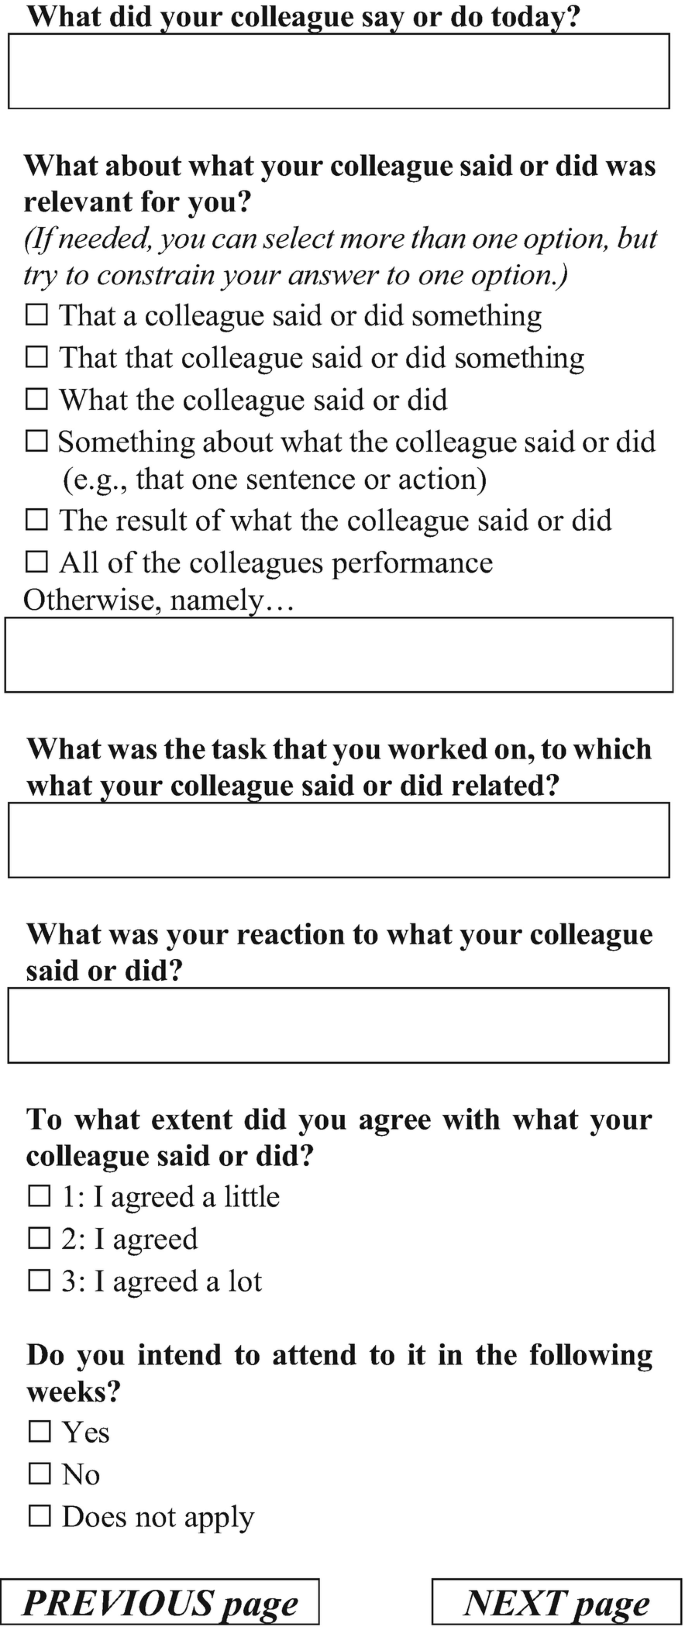 The text has 6 questions, 3 are direction questions and 3 are with options to choose from. Below are the buttons for the previous page and the next page.